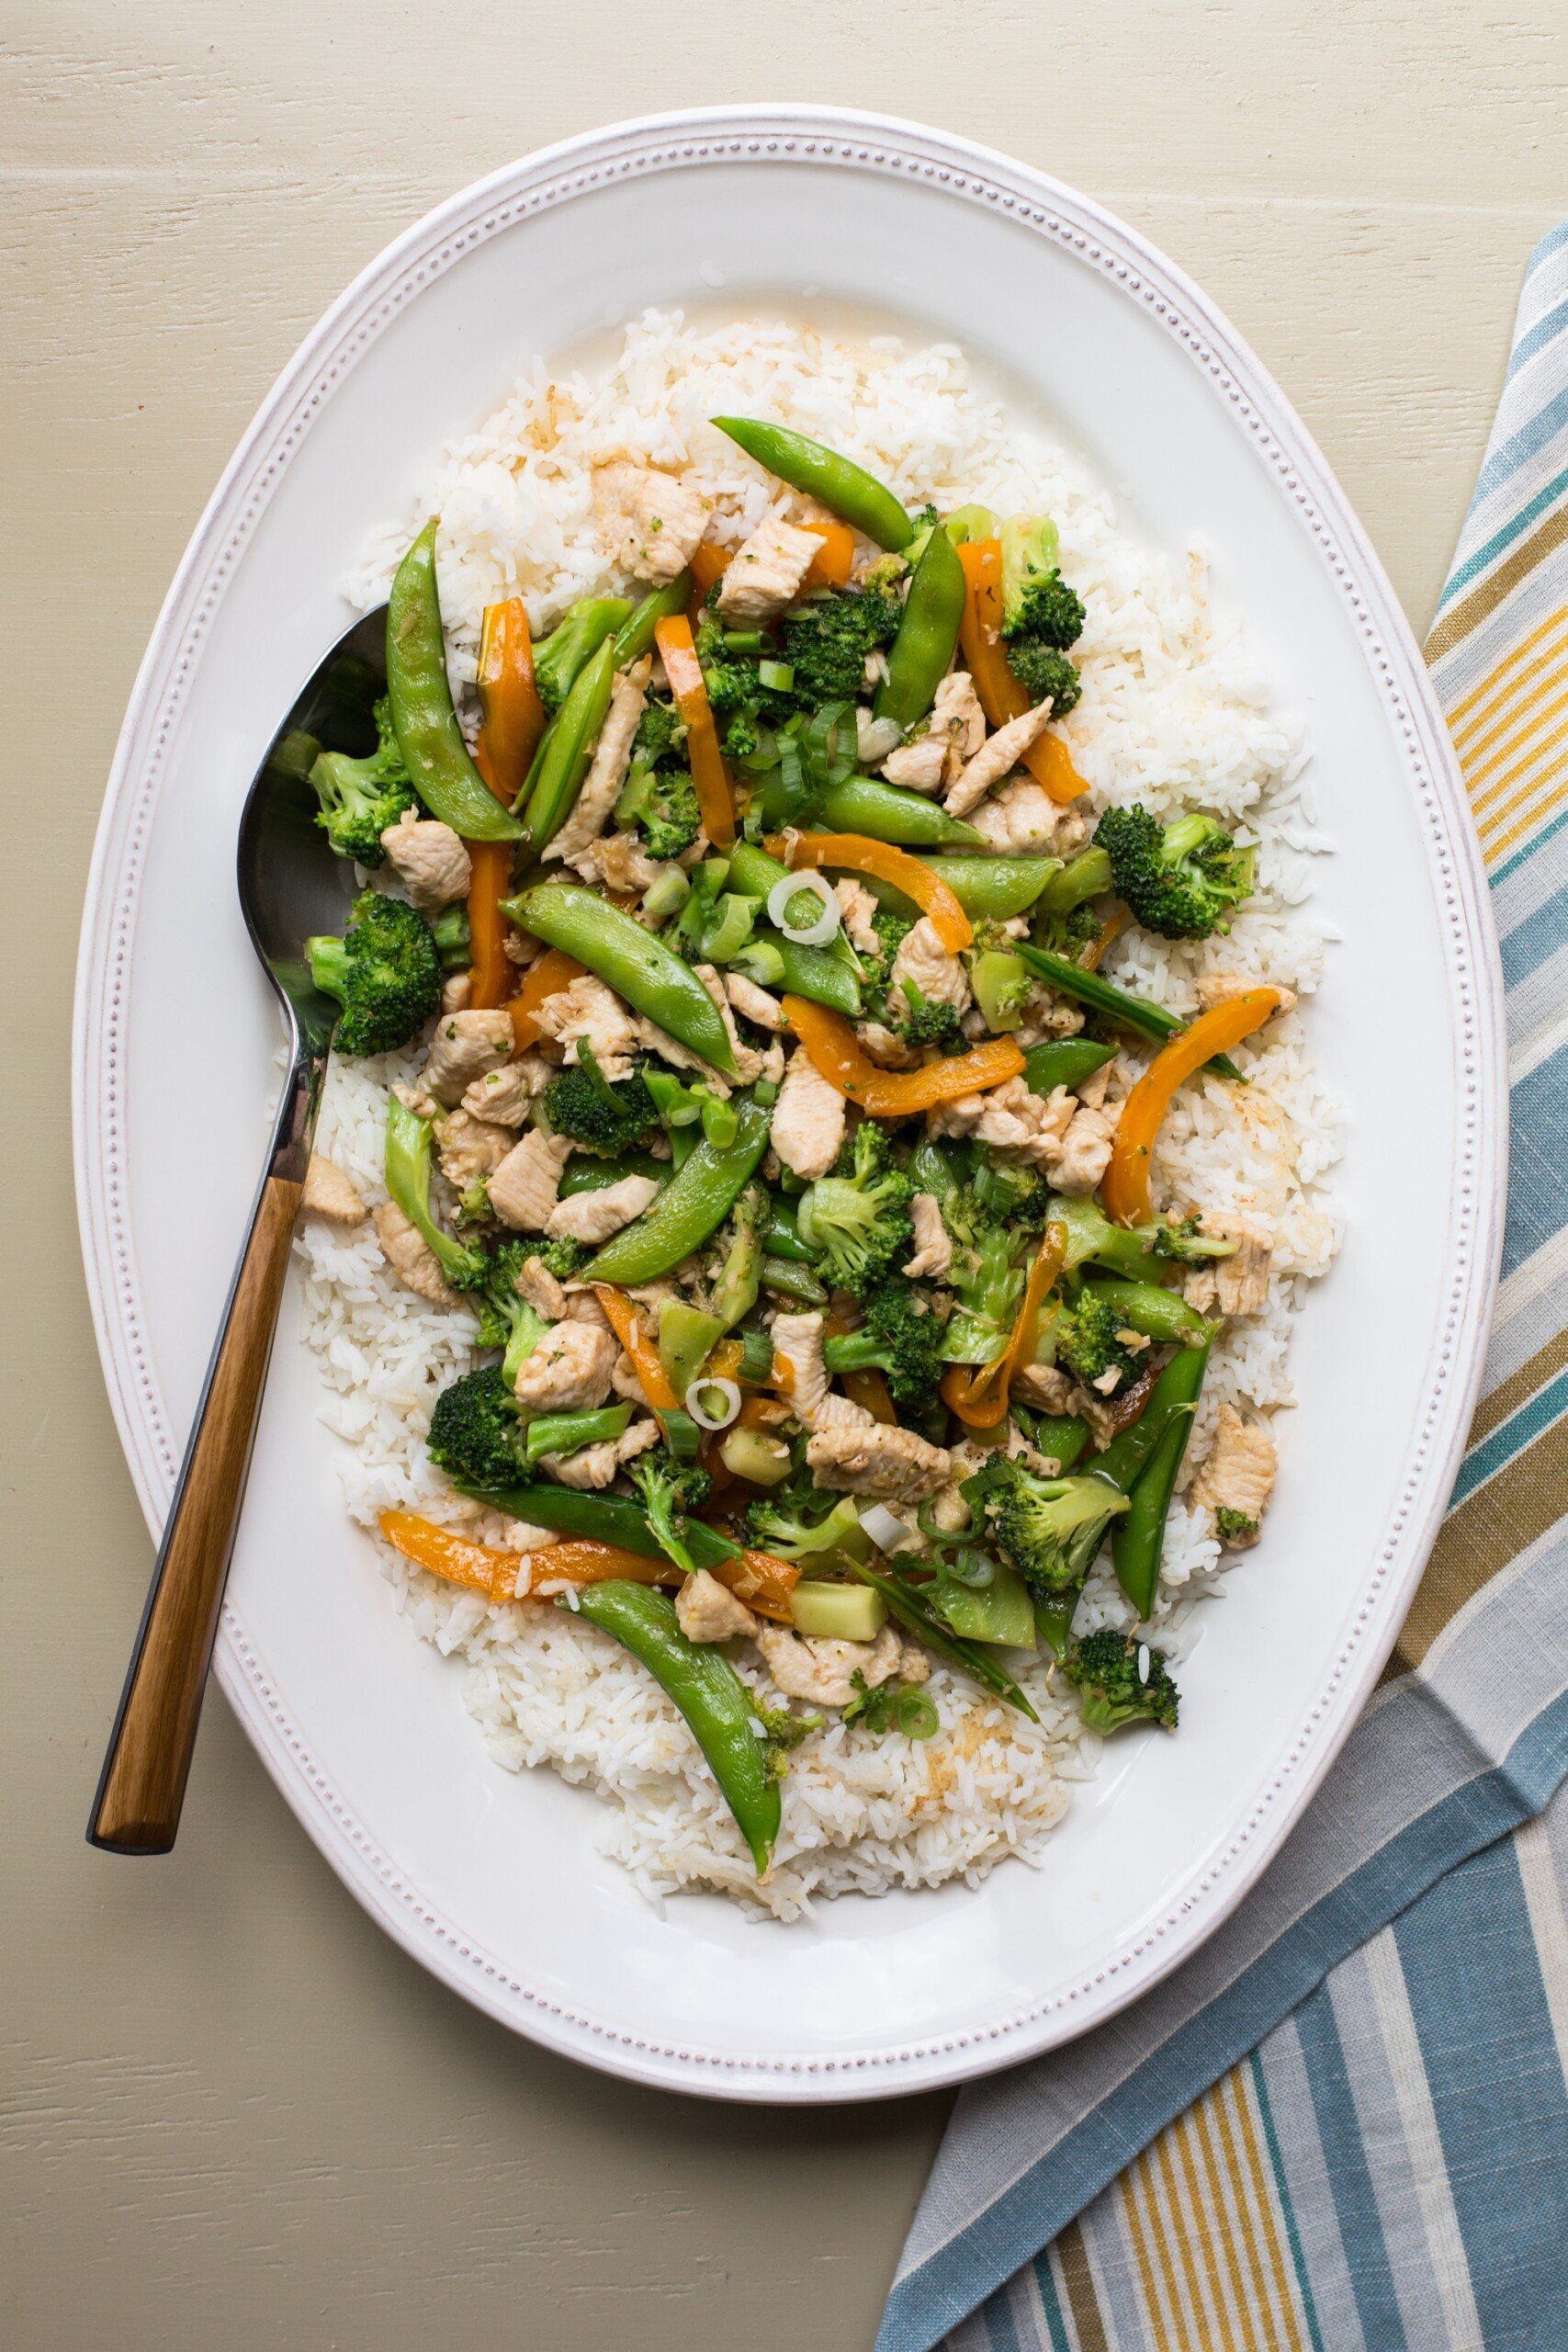 Chicken stir fry with broccoli and sugar snap peas over rice on plate.